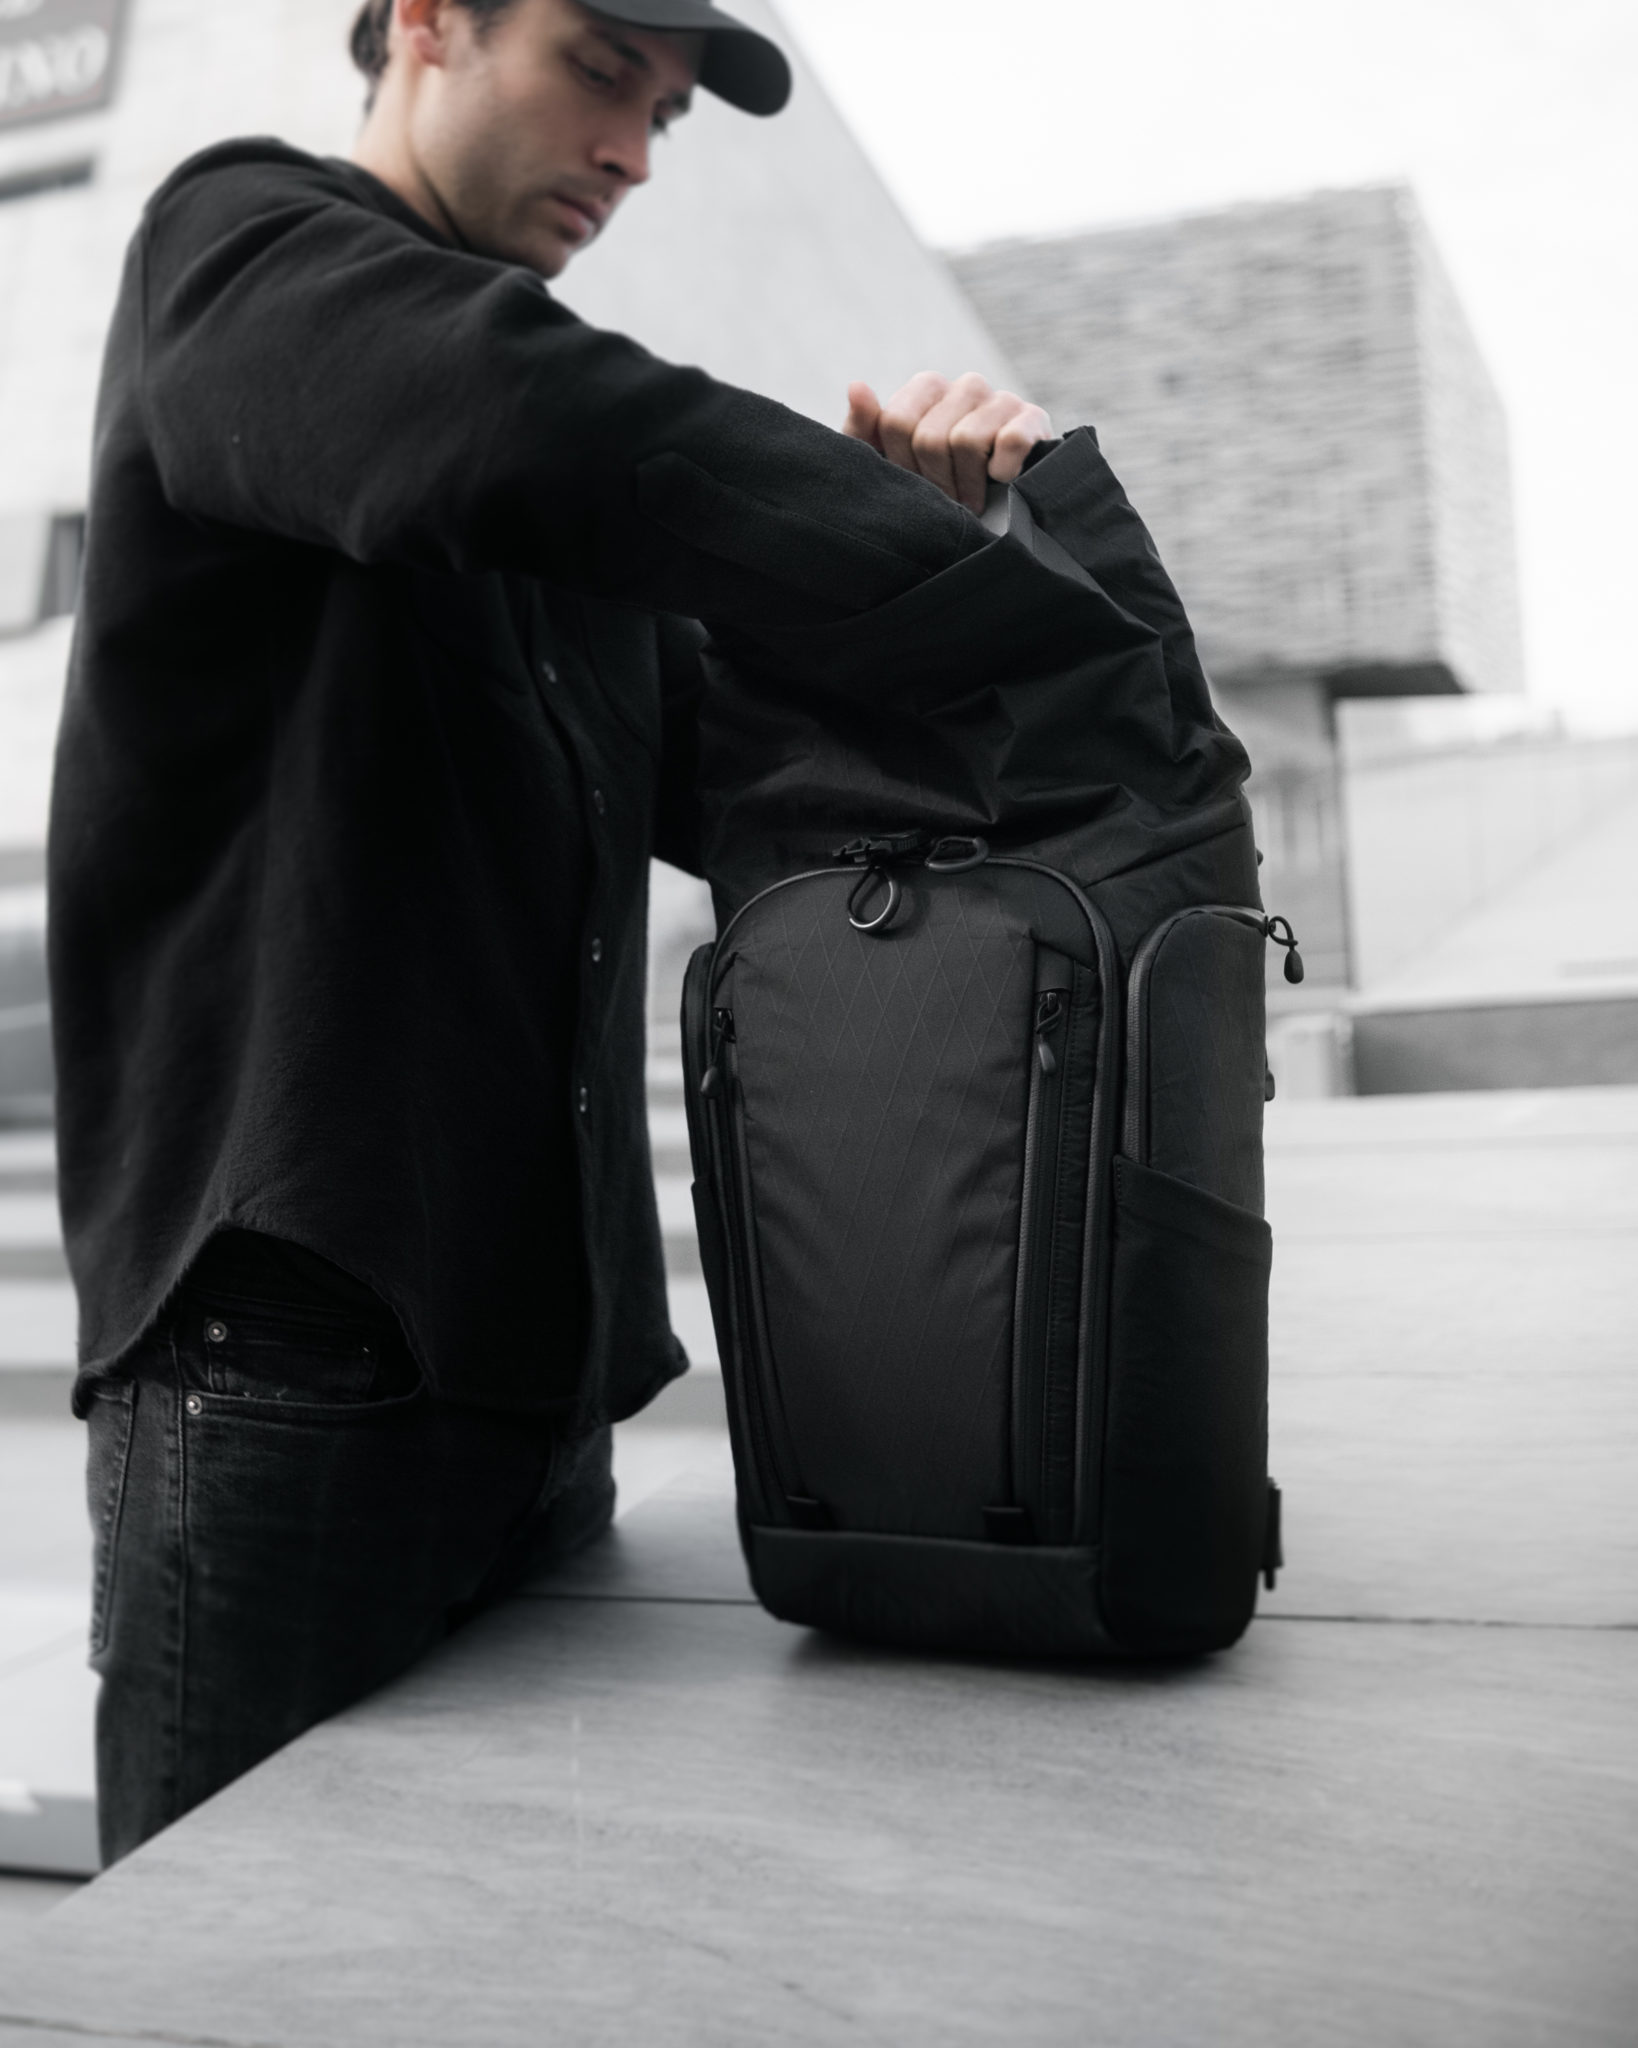 Modern Dayfarer Launches New Active Sling Pack - Carryology